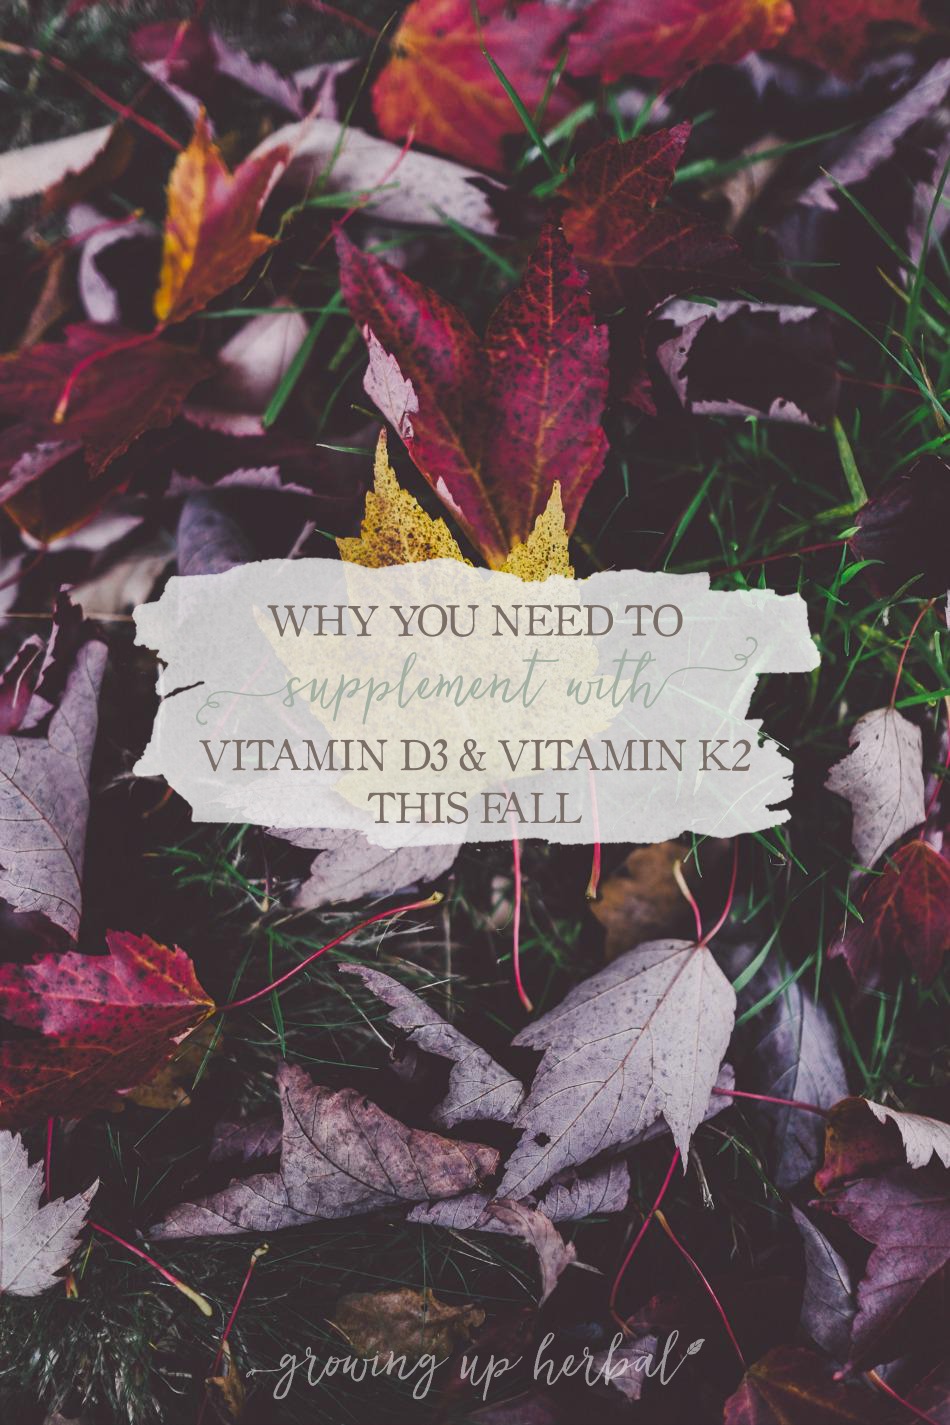 Why You Need To Supplement With Vitamin D3 And Vitamin K2 This Fall | Growing Up Herbal | Wanna keep your kid health this fall? You may need to add in a vitamin d3/k2 supplement. Here's why.